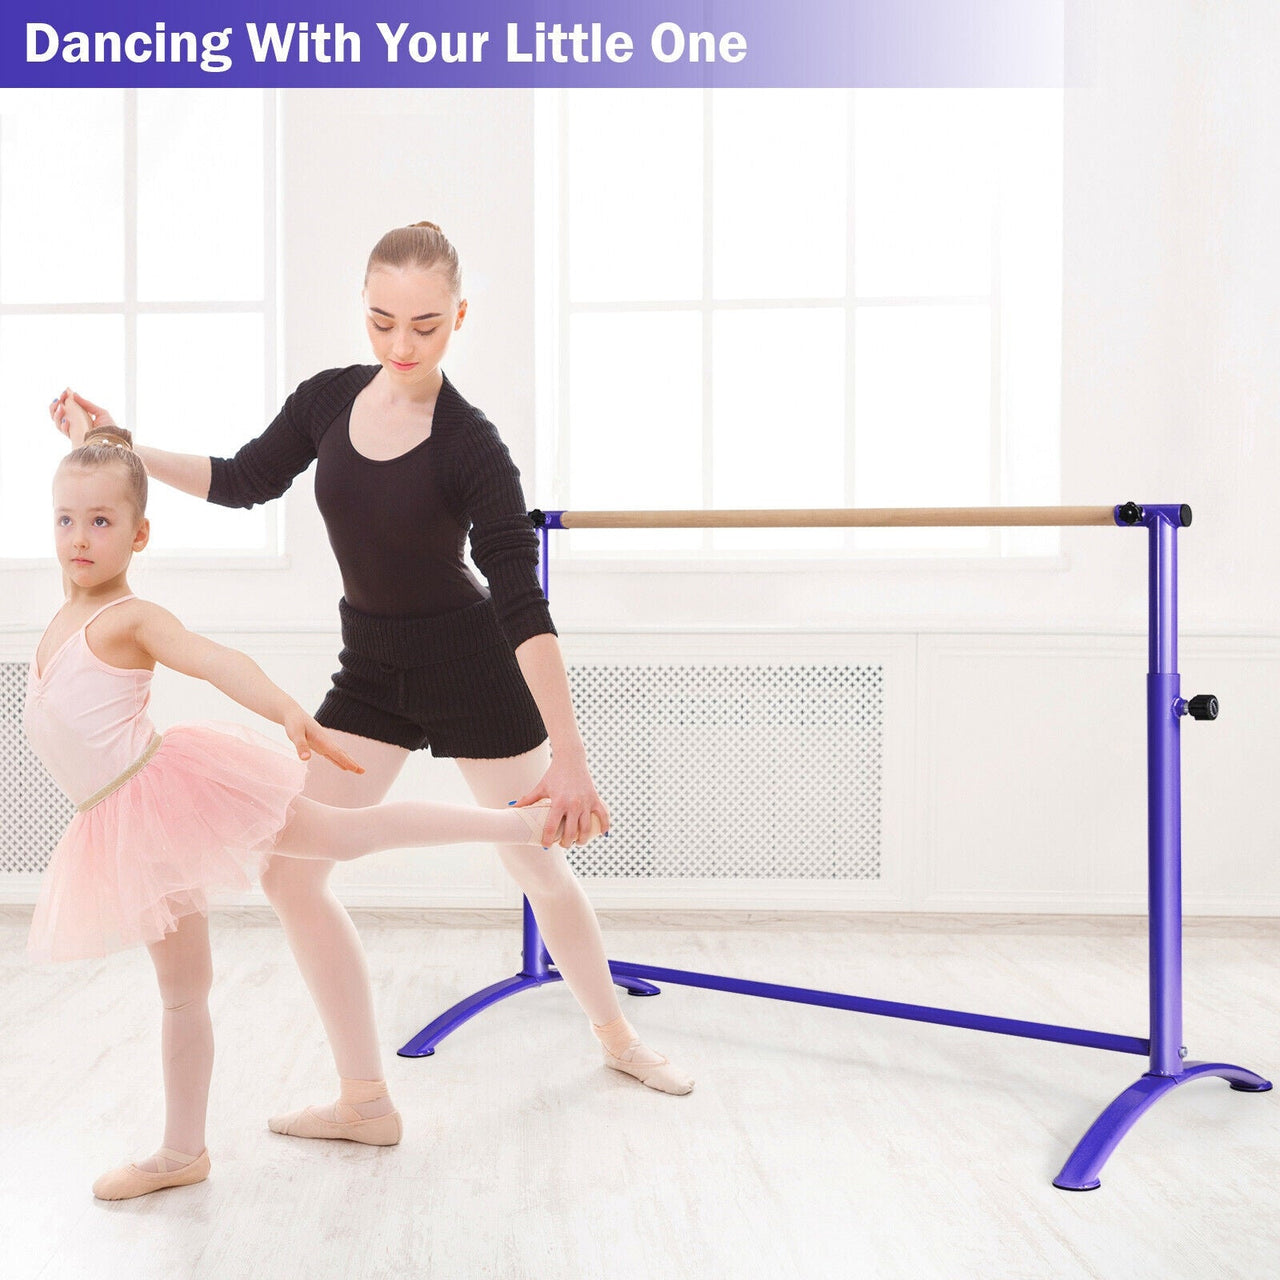 51 Inch Ballet Barre Bar with 4-Position Adjustable Height